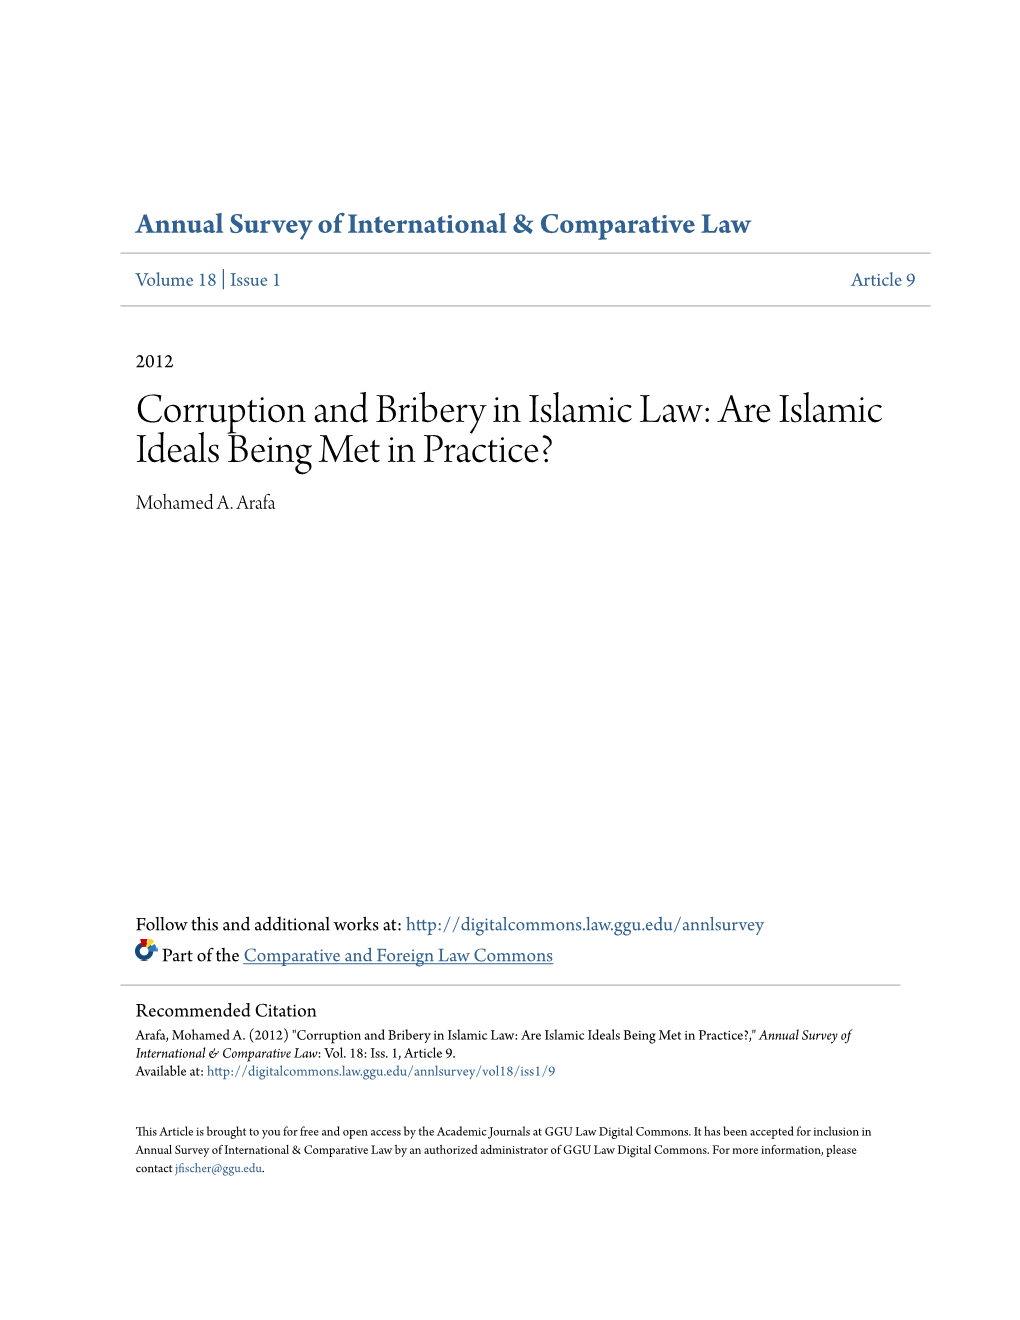 Corruption and Bribery in Islamic Law: Are Islamic Ideals Being Met in Practice? Mohamed A